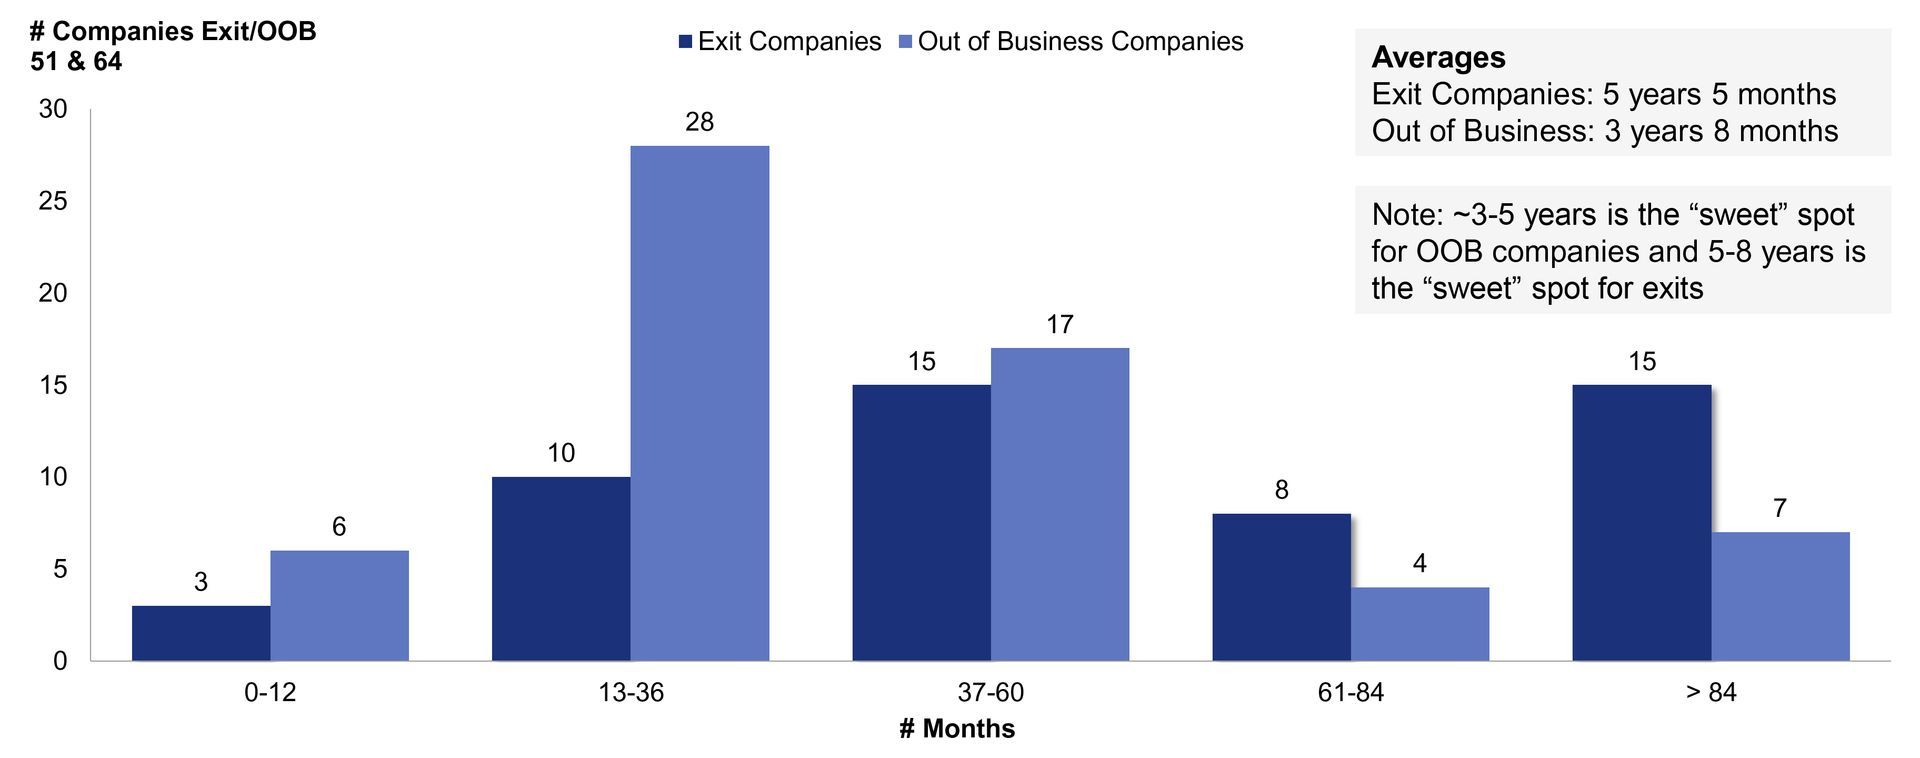 CTAN - Length of Time for Exit or Out of Business – 2006 to 2022 (115 Companies)